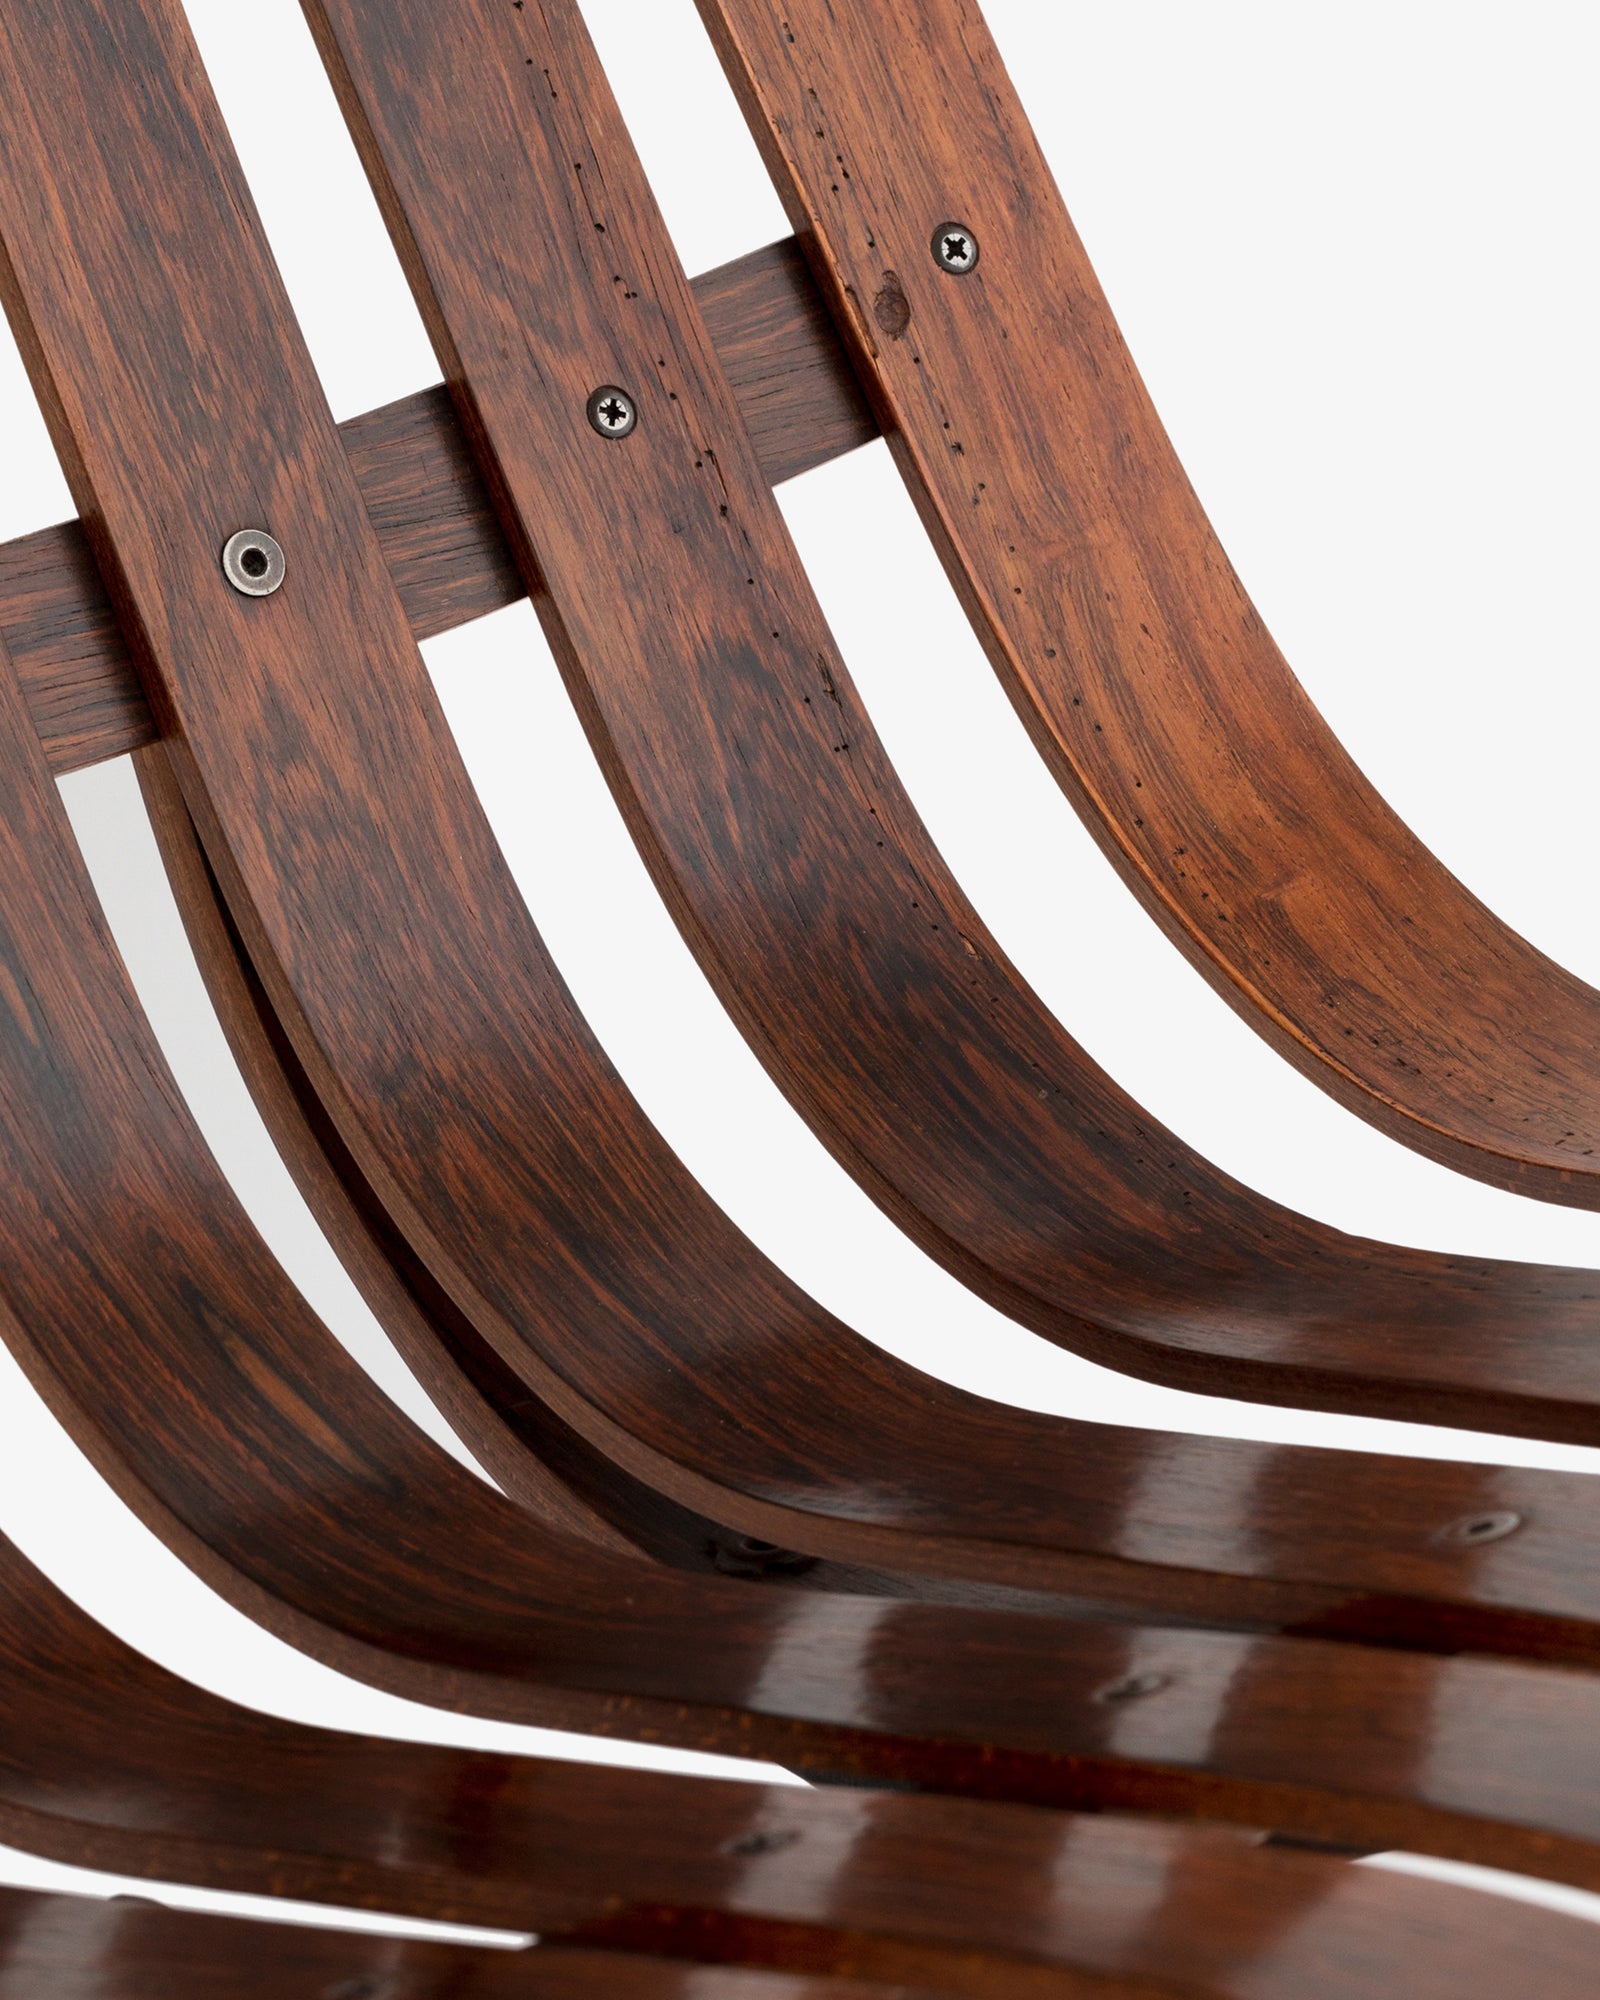 Hans Brattrud for Hove Mobler Rosewood Lounge Chair